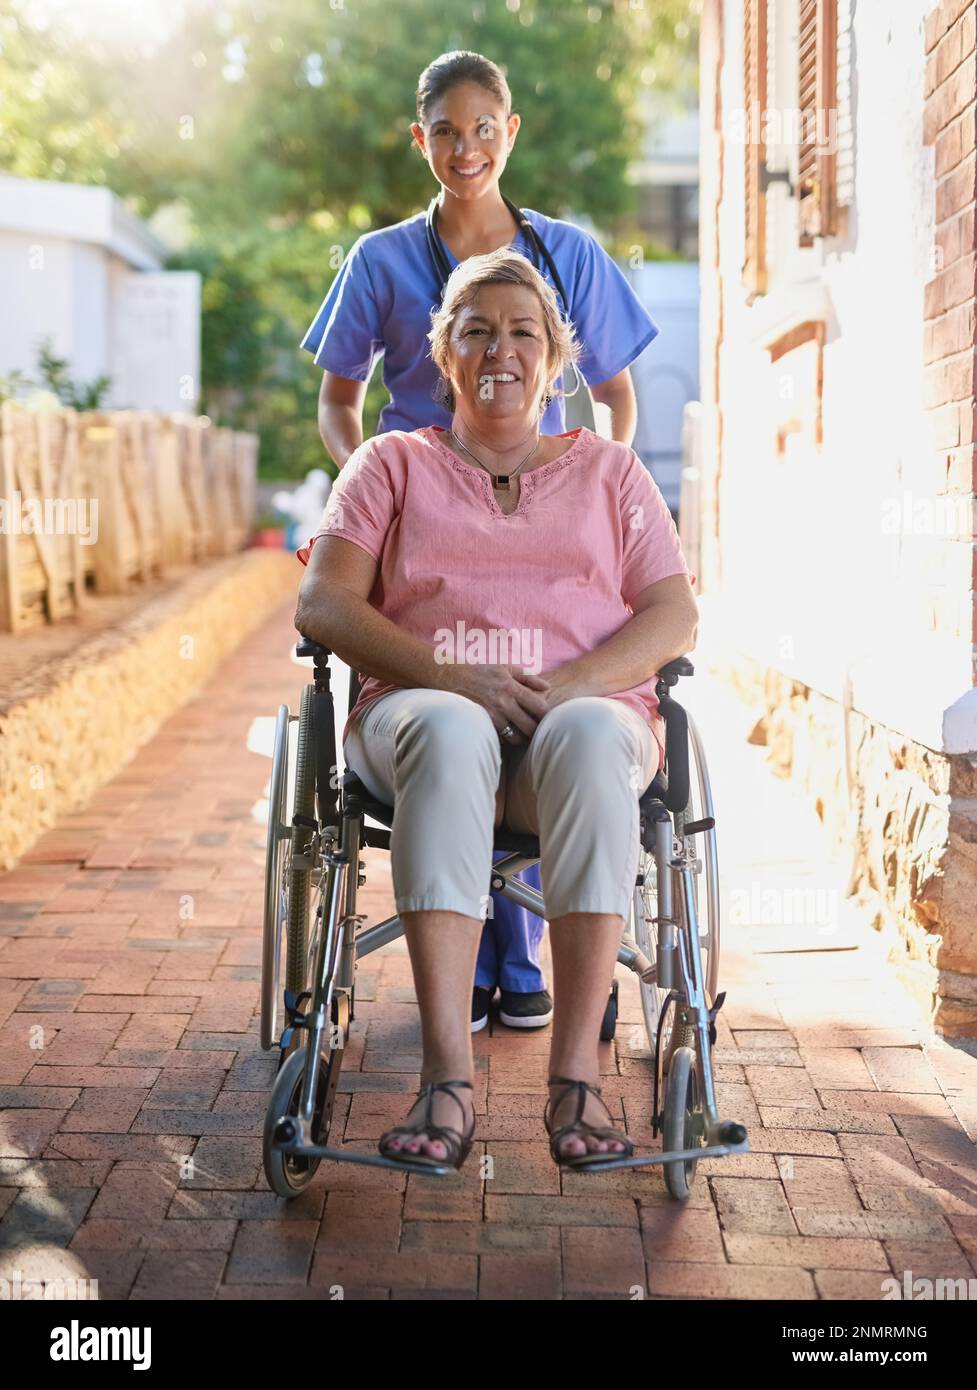 Out for some fresh air. Portrait of a caregiver pushing a senior patient in  a wheelchair outside Stock Photo - Alamy